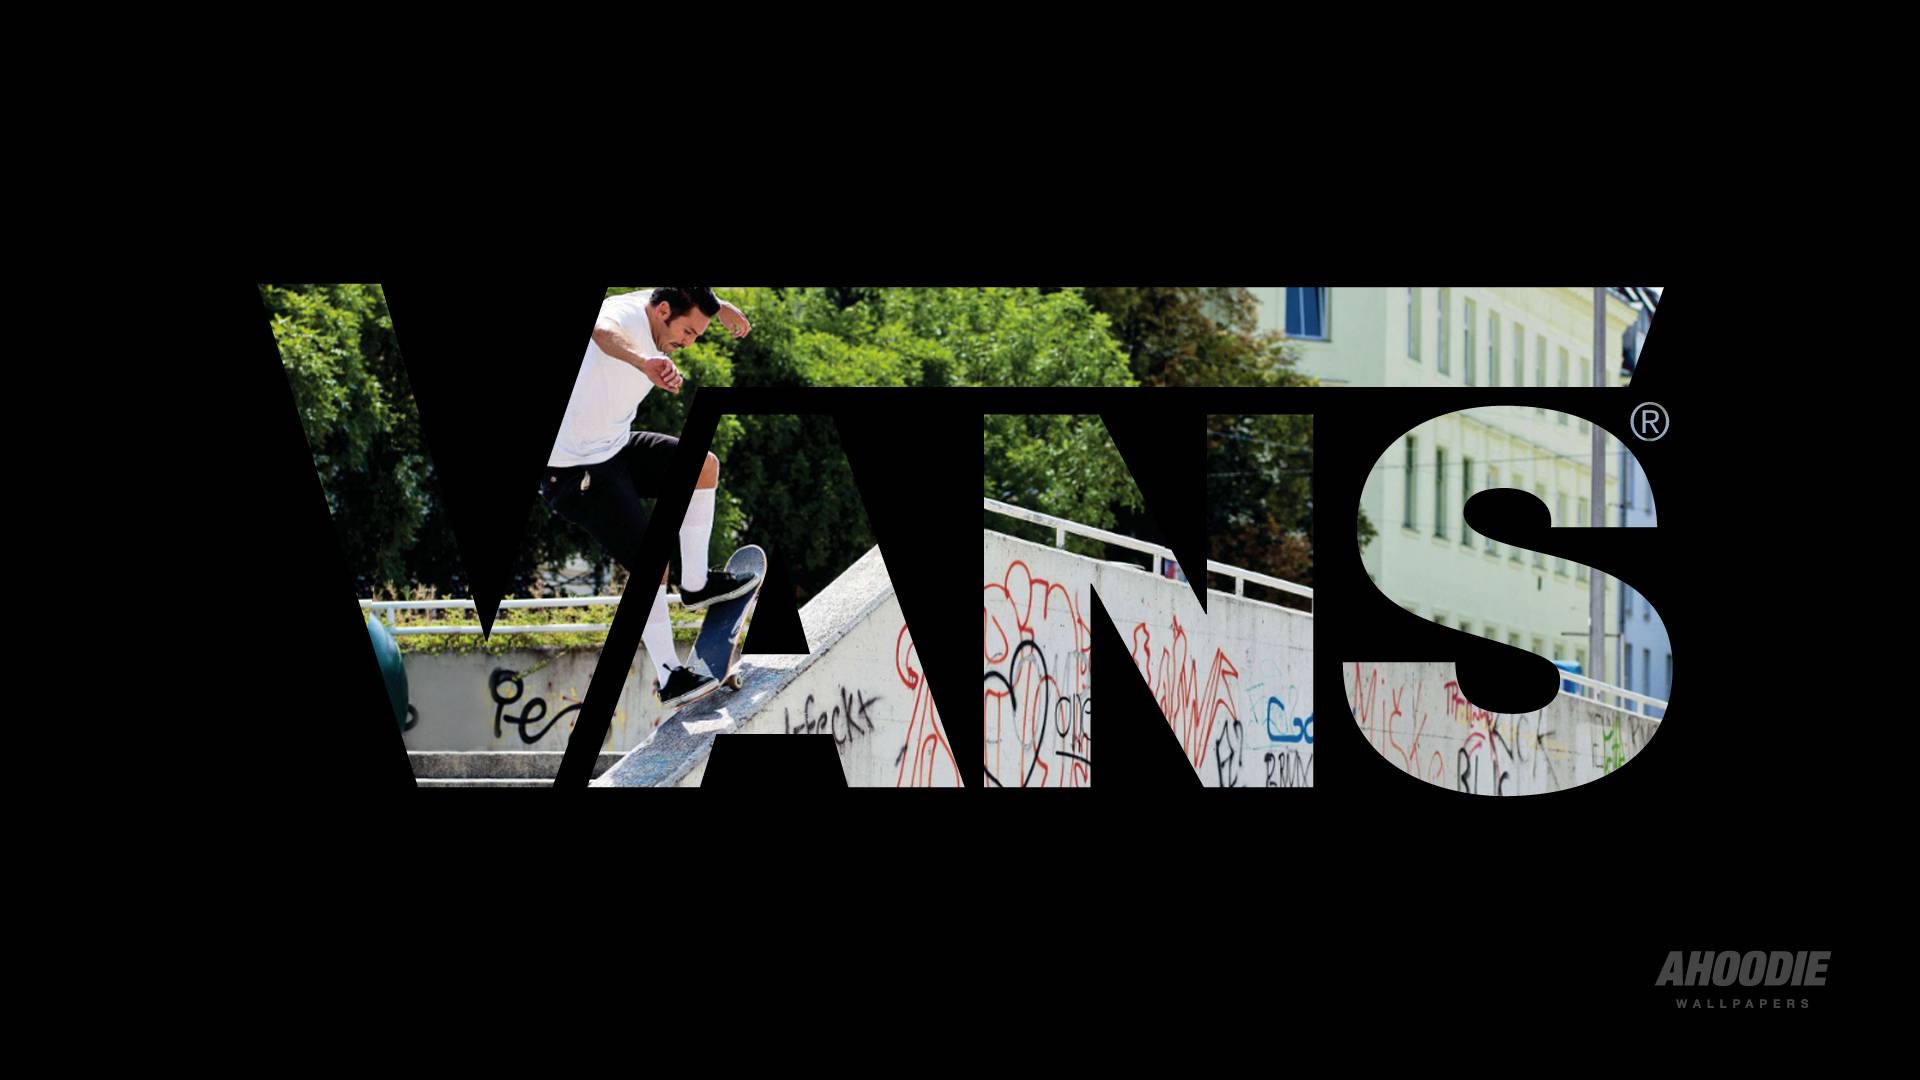 Vans Skateboarding Wallpaper for desktop and mobile devices. Download and share with your friends. - Vans